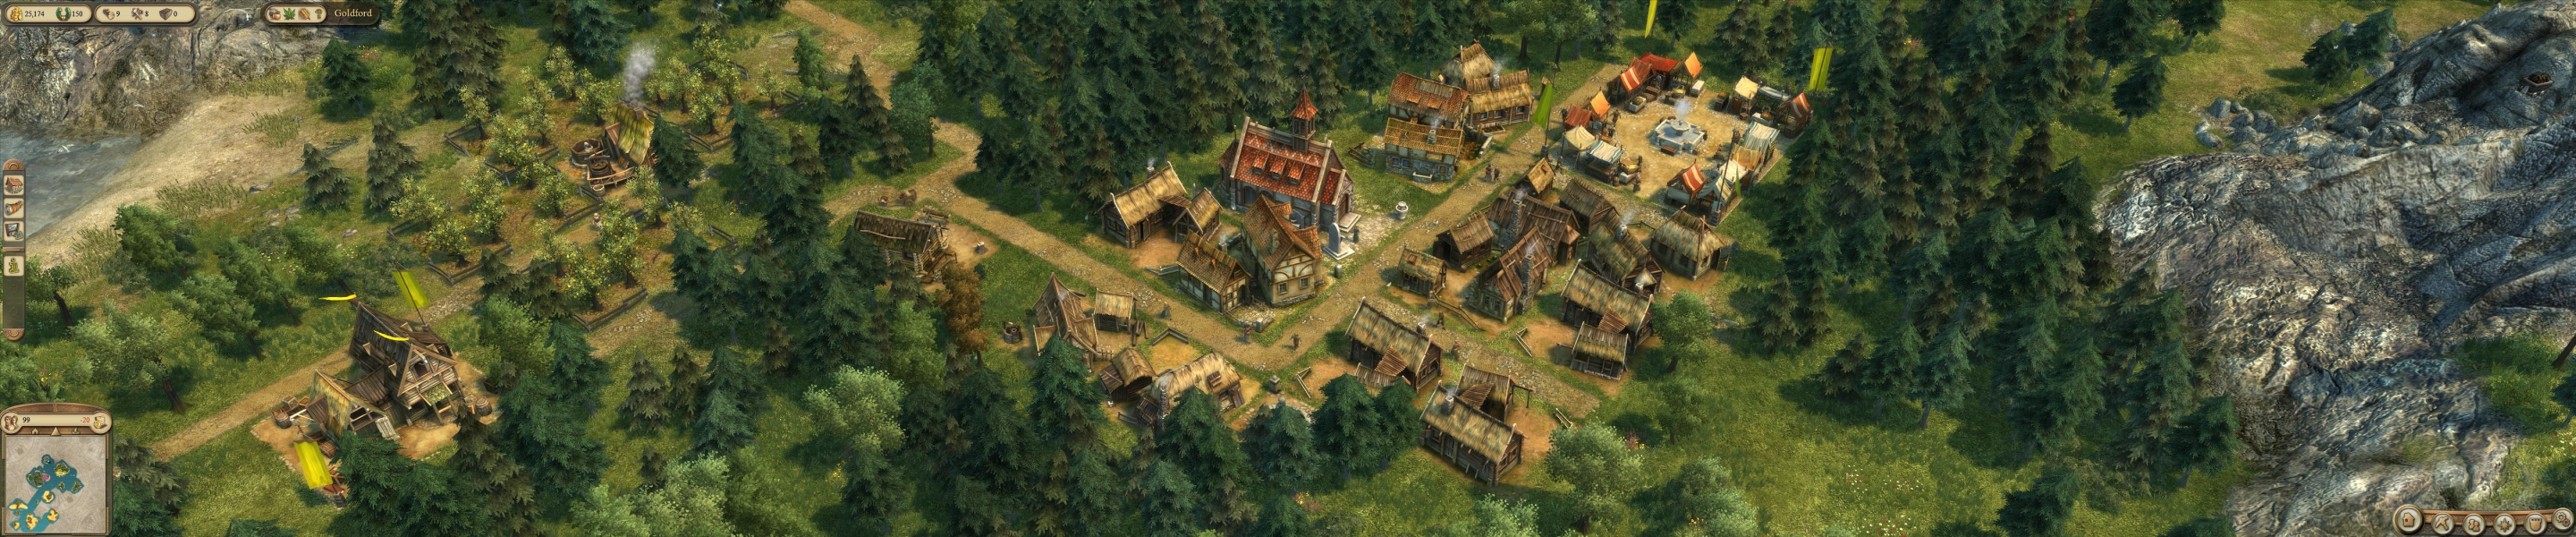 Anno 1404 on steam фото 37